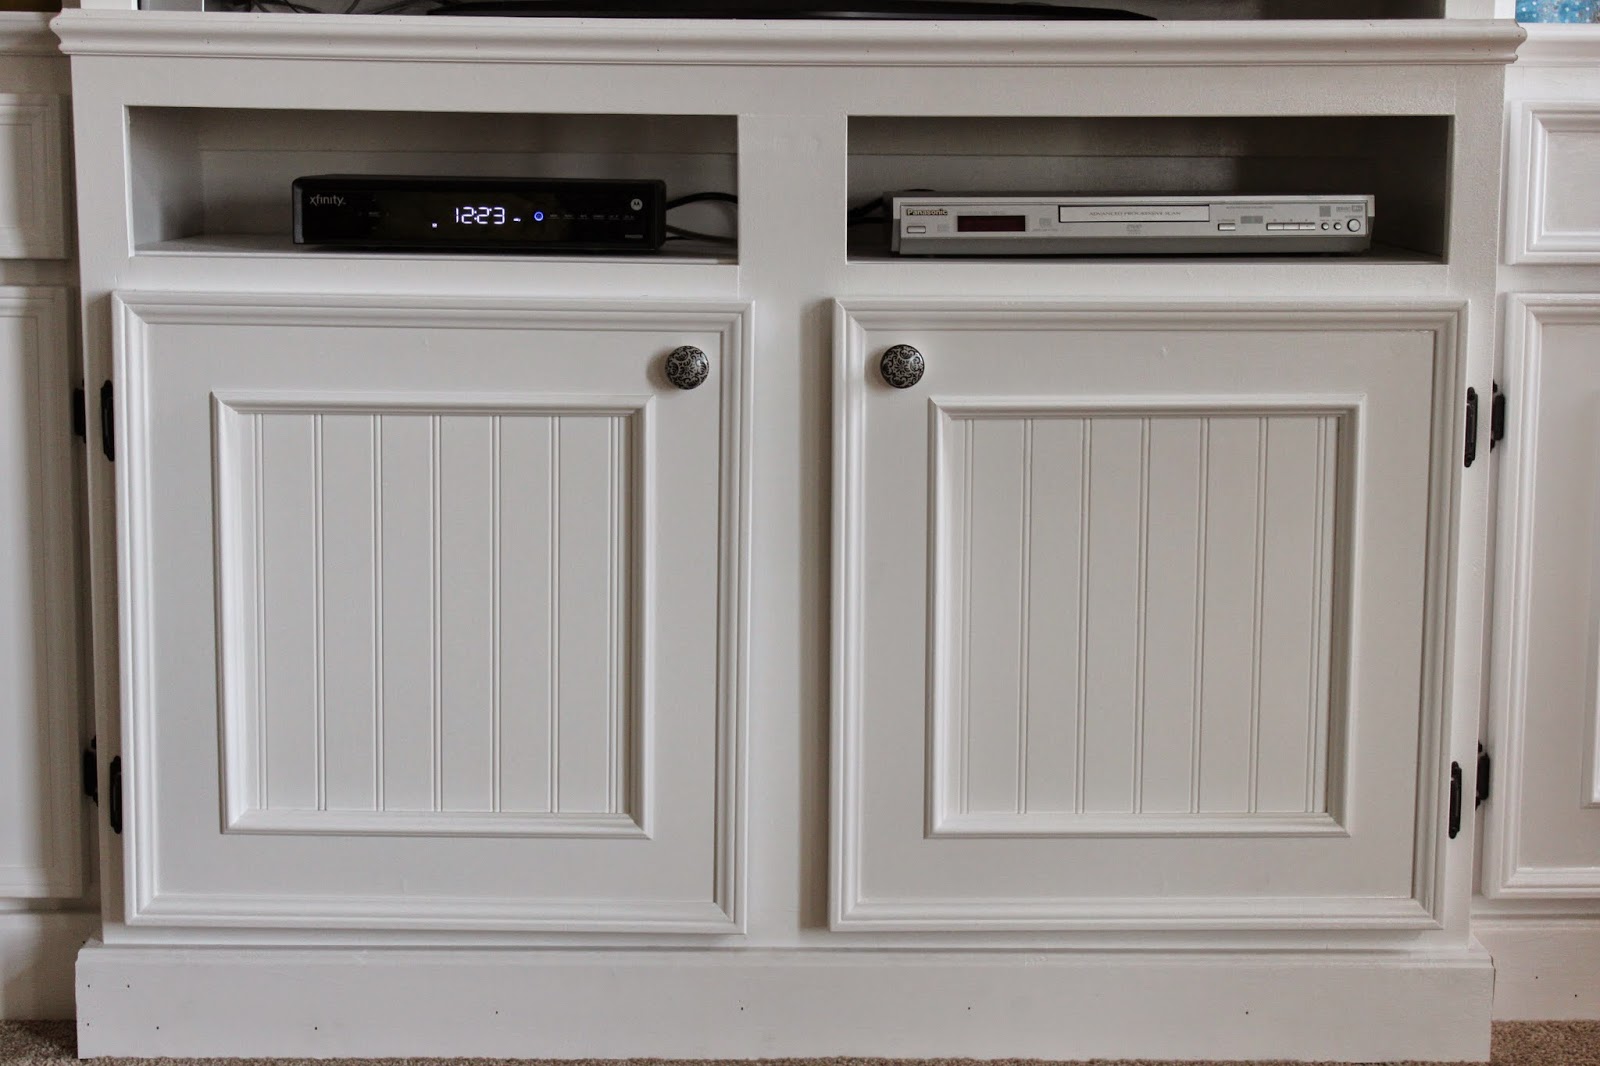  used as backing on open shelving and front inserts of cabinet doors